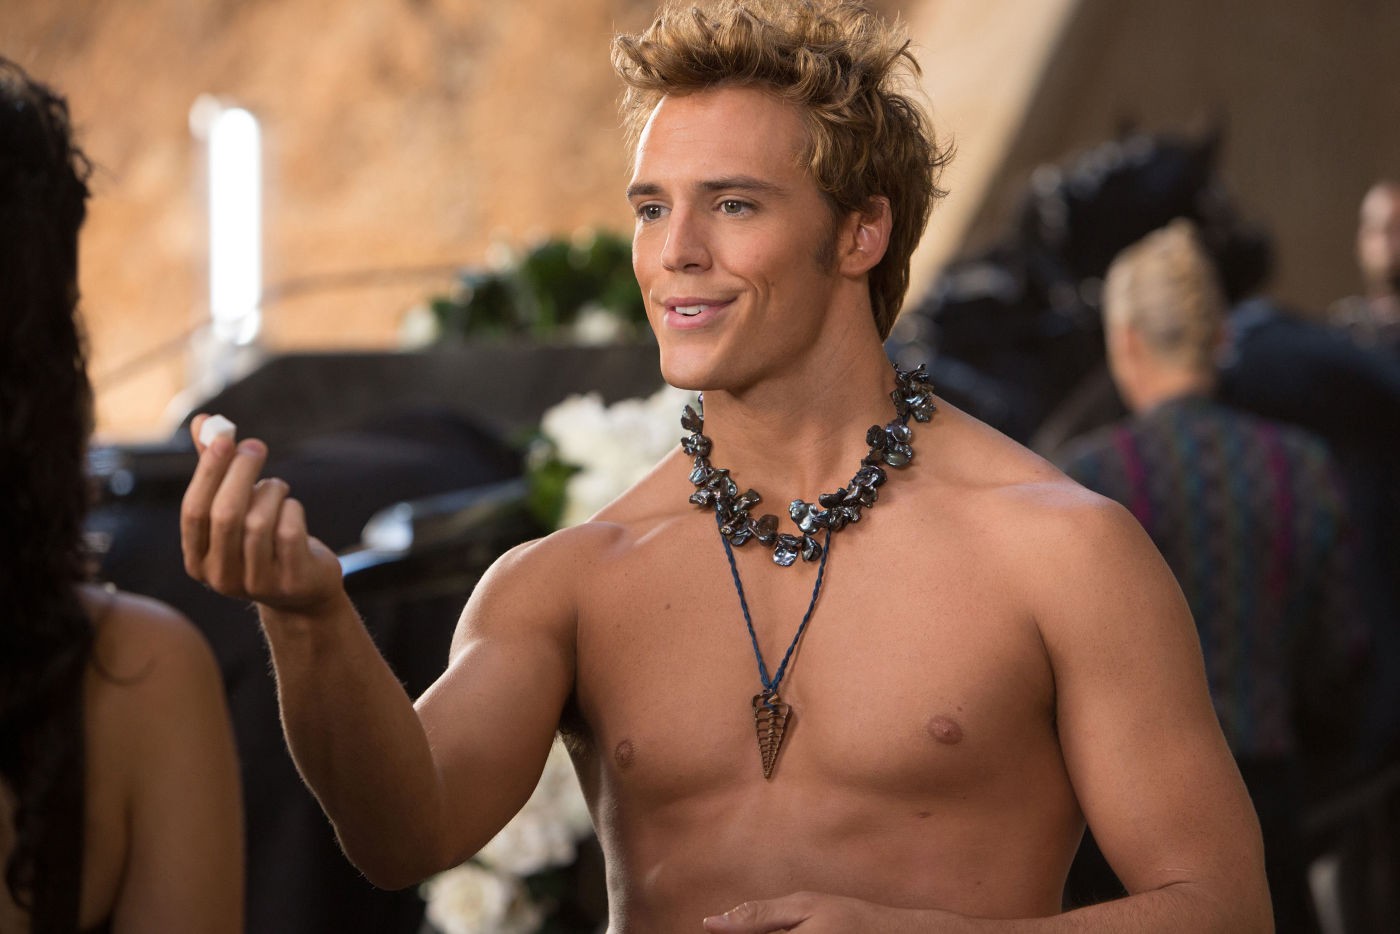 Sam Claflin stars as Finnick Odair in Lionsgate Films' The Hunger Games: Catching Fire (2013)